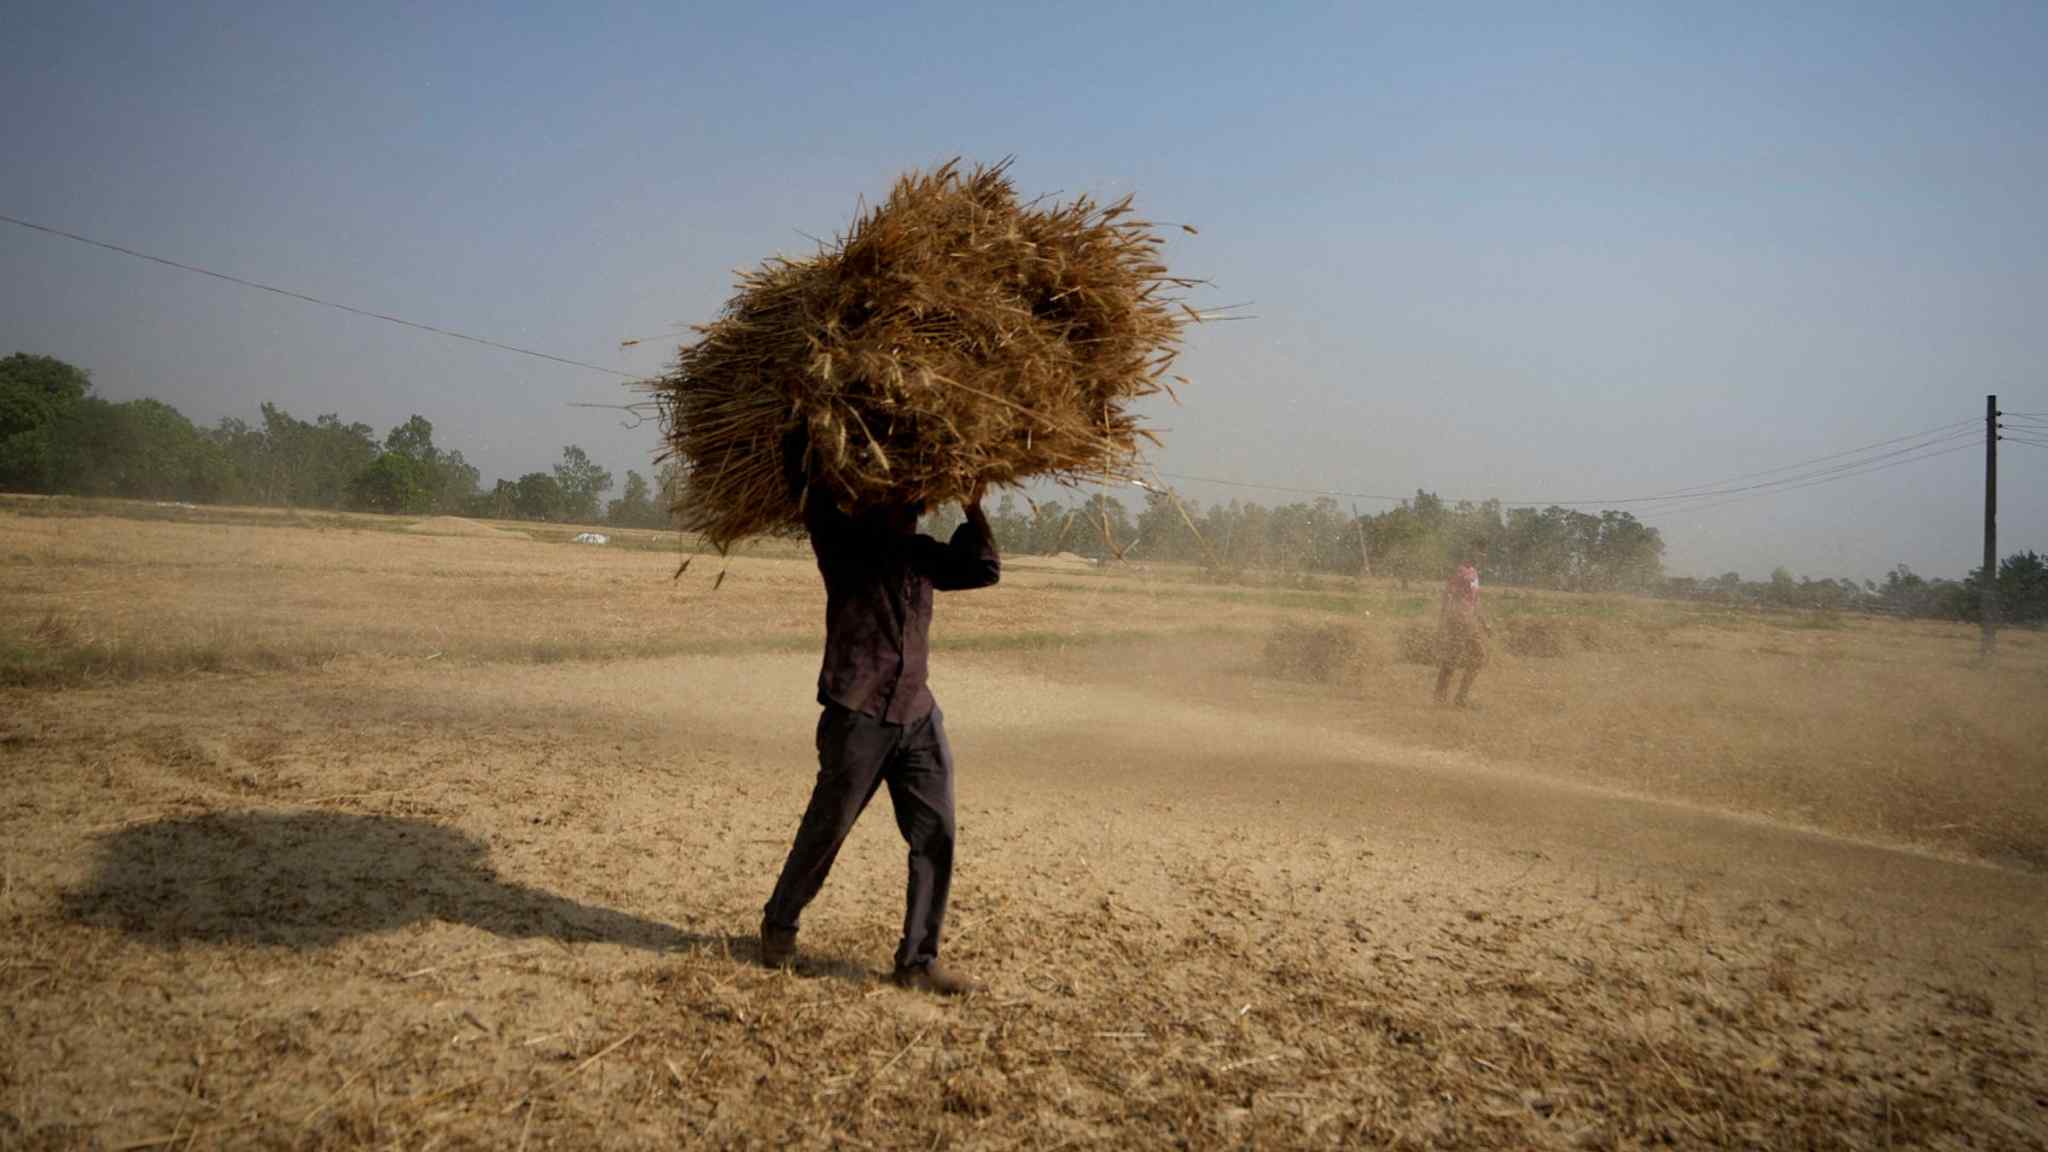 Wheat prices rise almost 6% as India export ban shakes markets